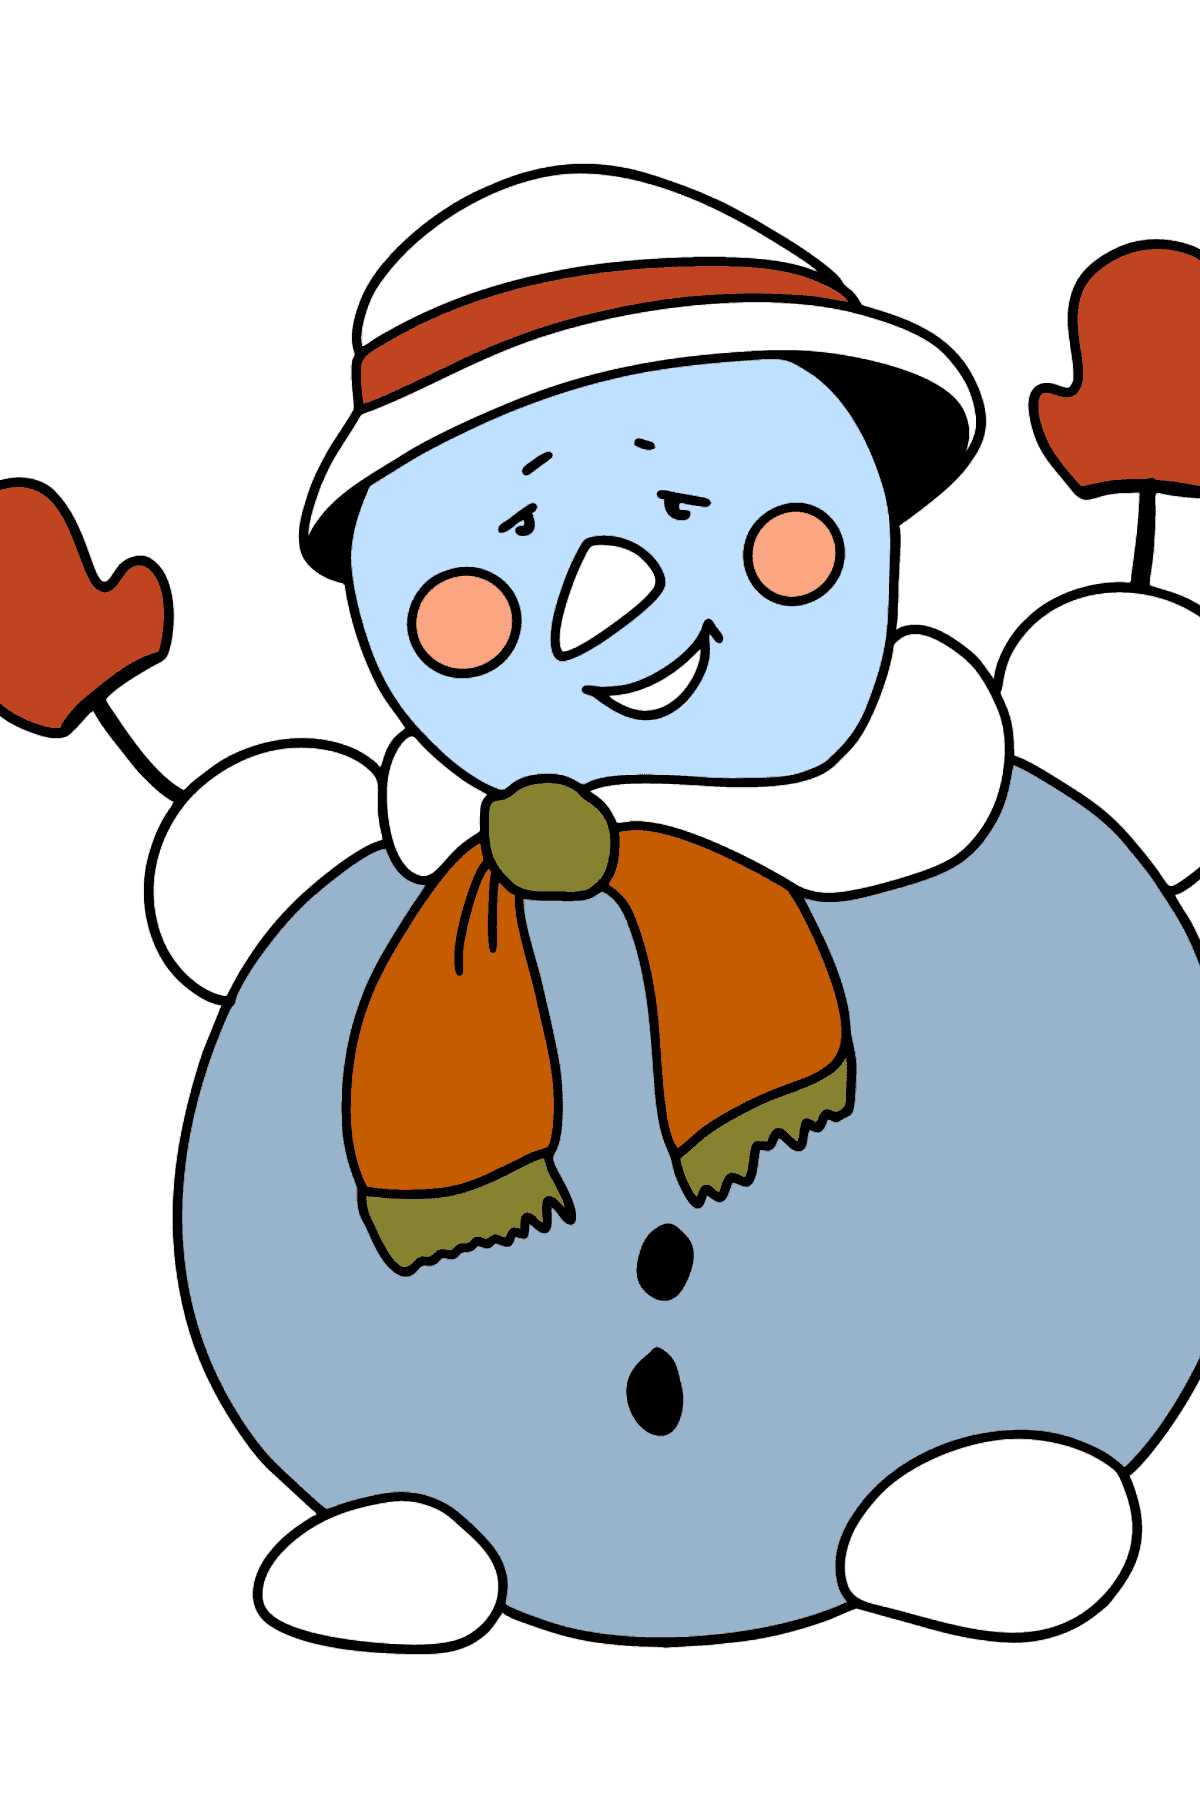 Happy snowman coloring page - Coloring Pages for Kids